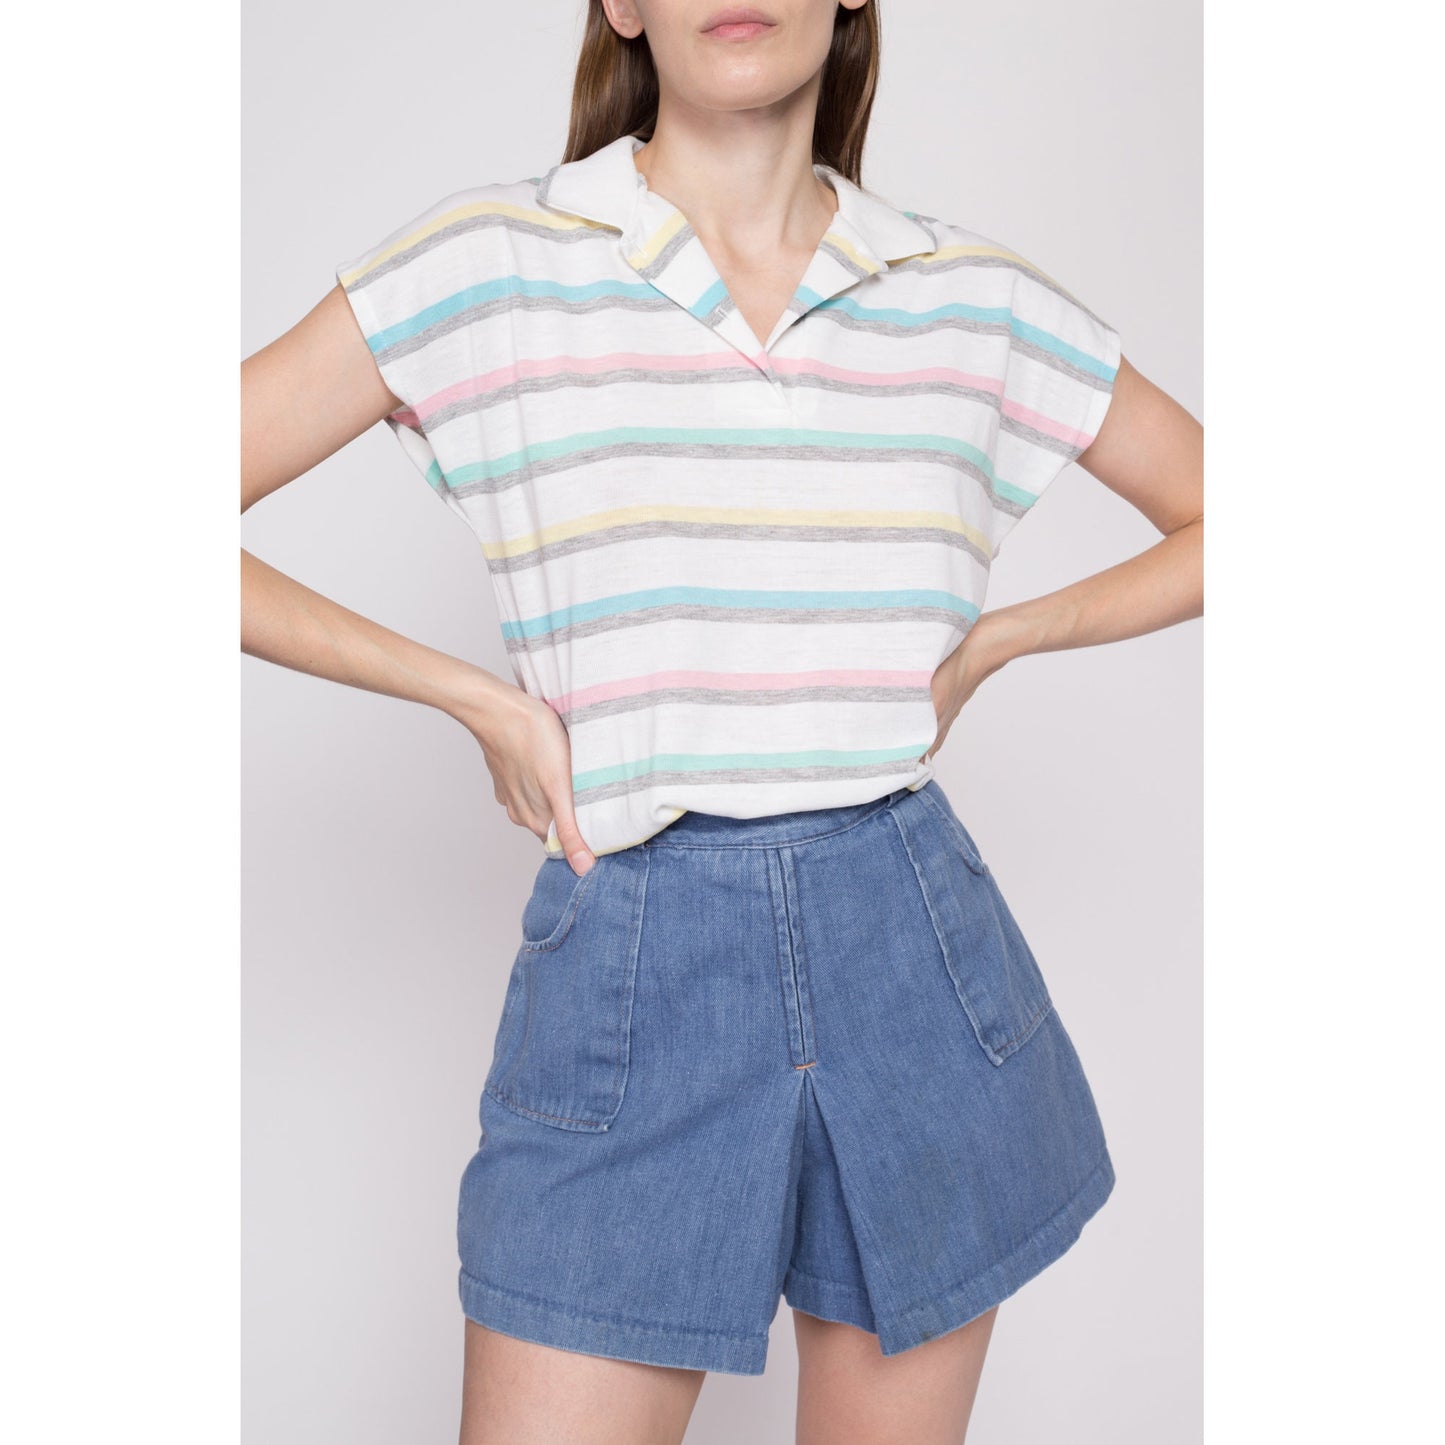 80s Pastel Striped Polo Shirt - Medium to Large | Vintage Cap Sleeve Collared Retro Top